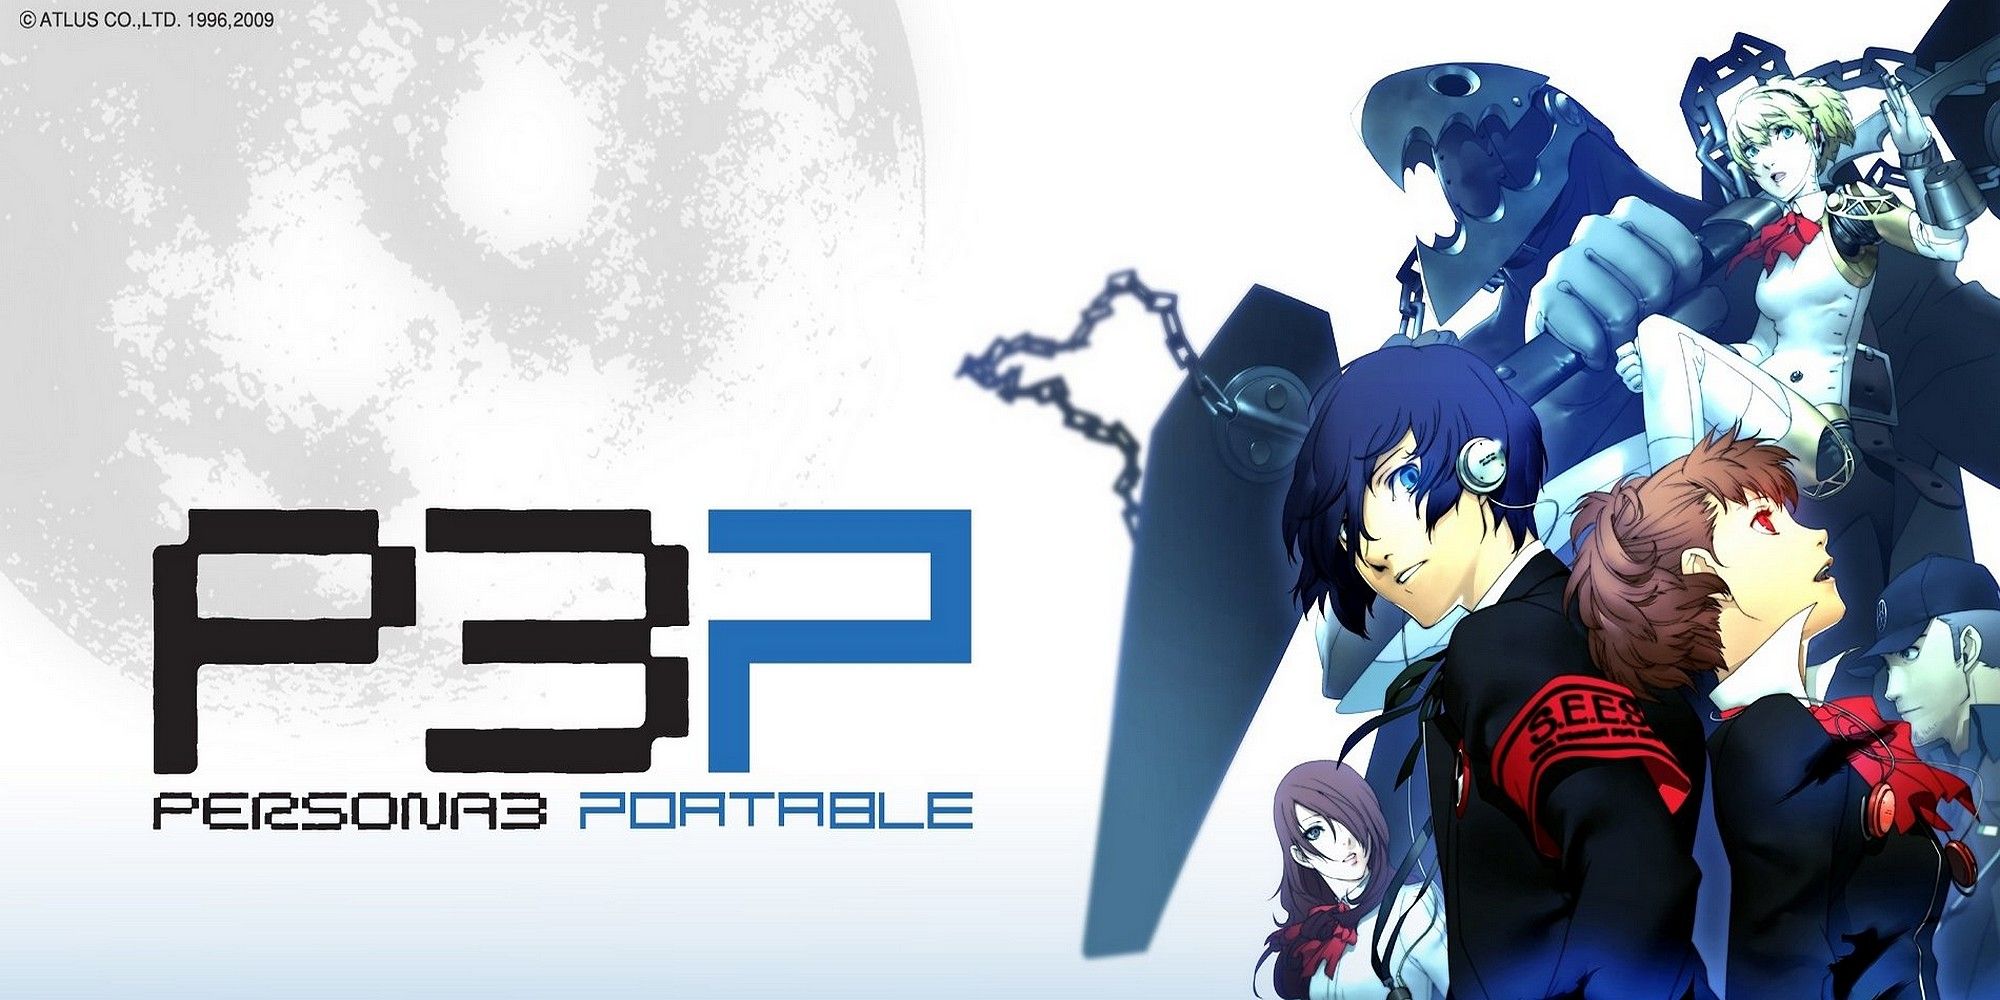 promotional art for persona 3 portable featuring the members of sees